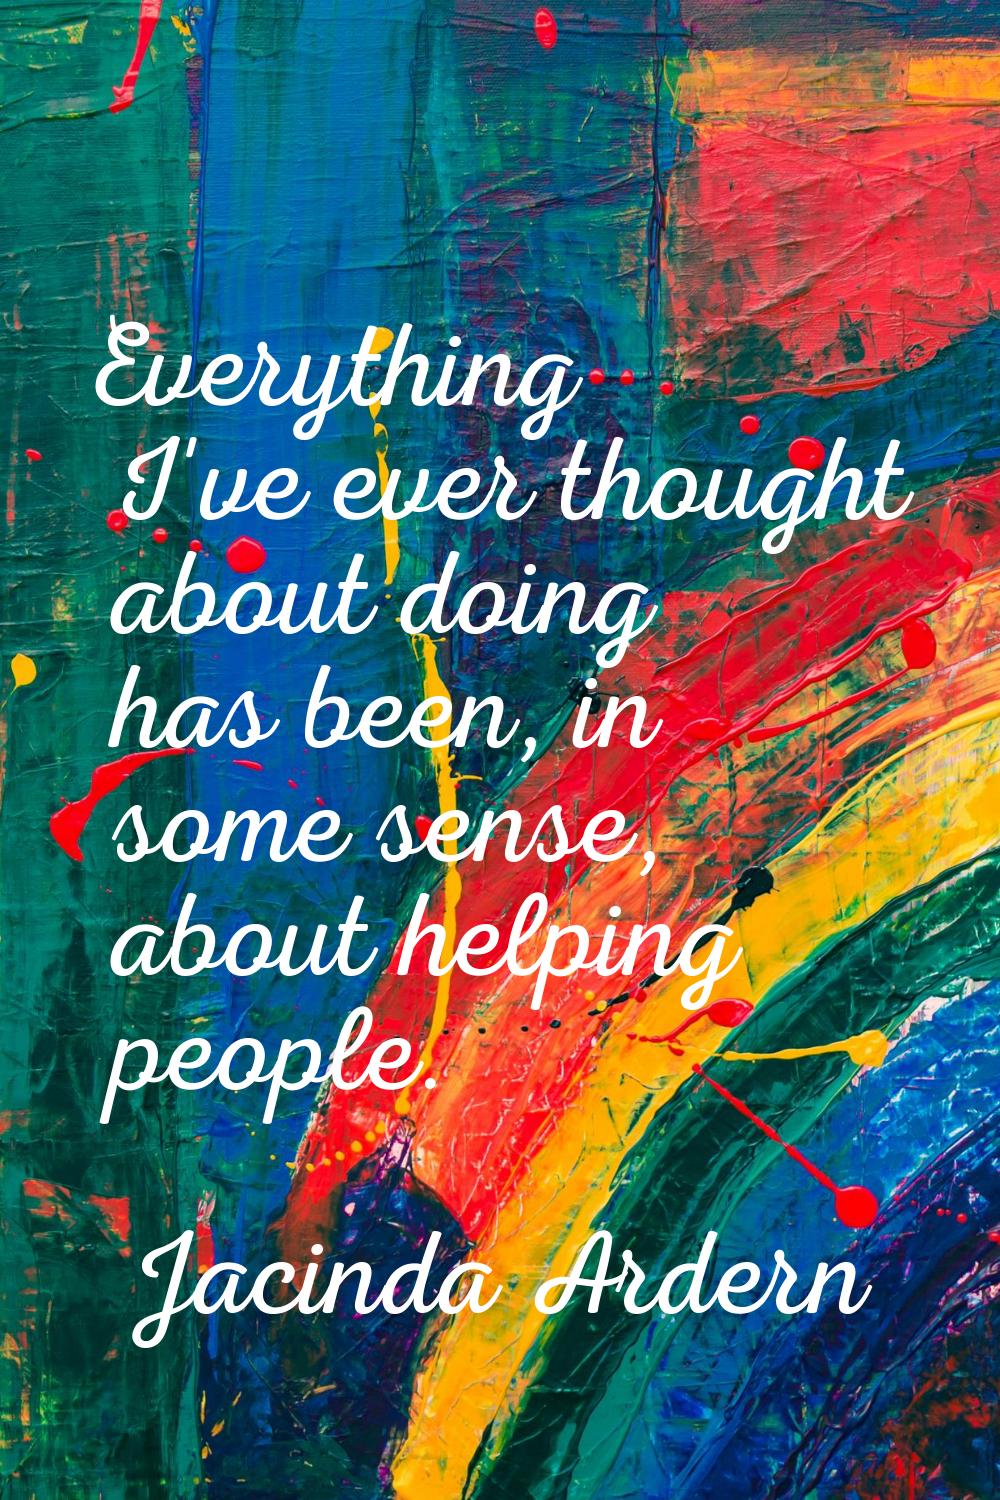 Everything I've ever thought about doing has been, in some sense, about helping people.